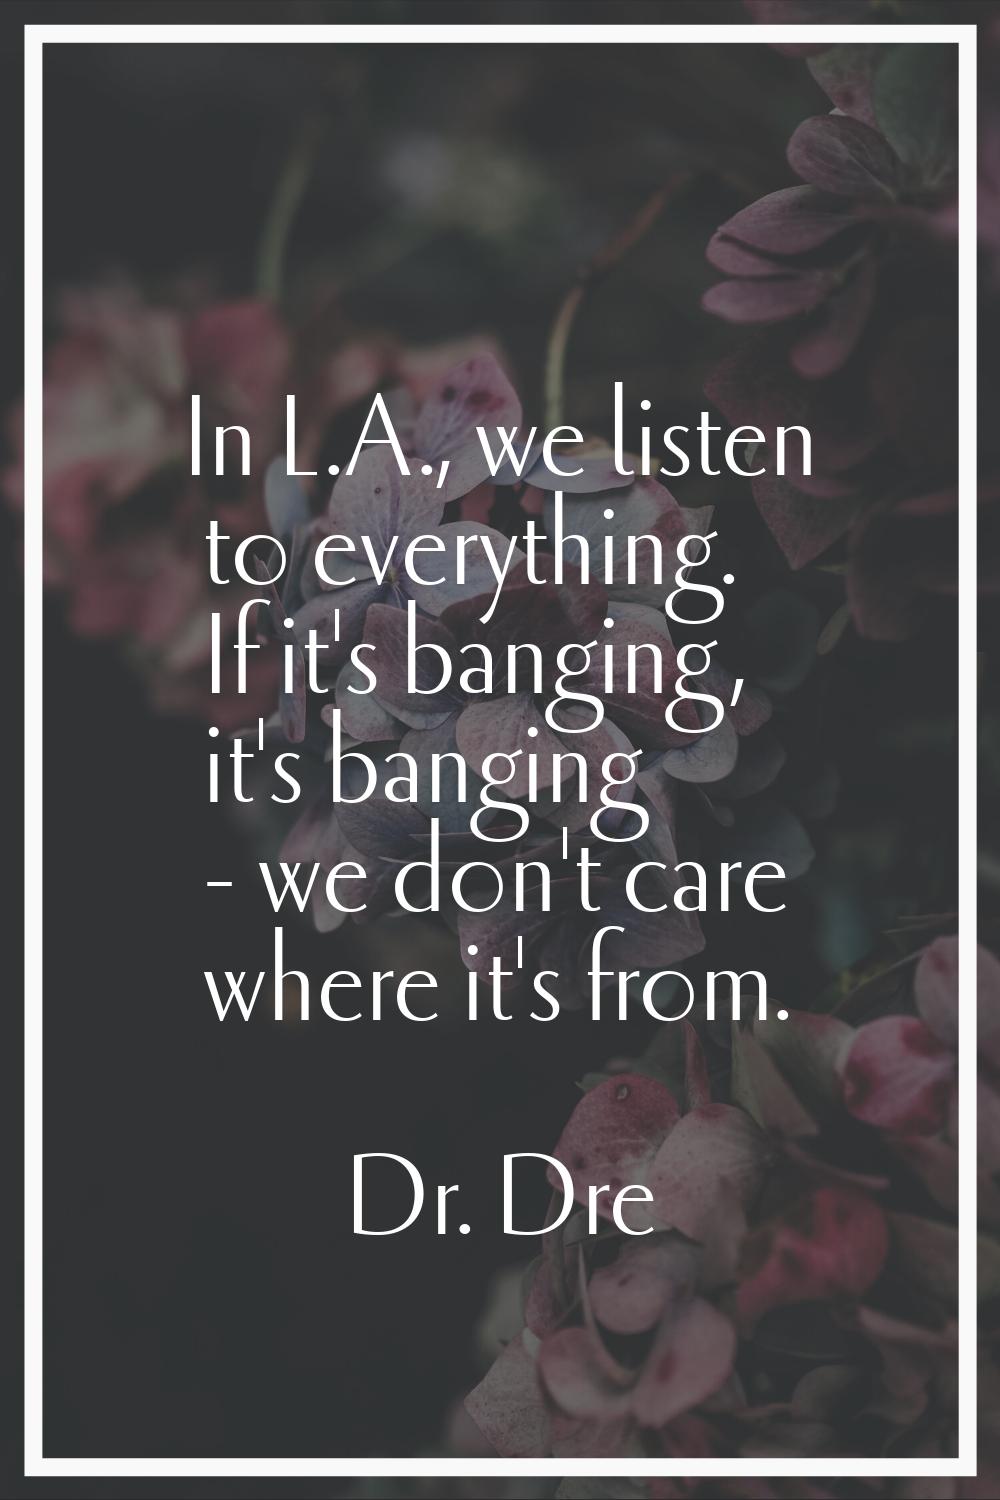 In L.A., we listen to everything. If it's banging, it's banging - we don't care where it's from.